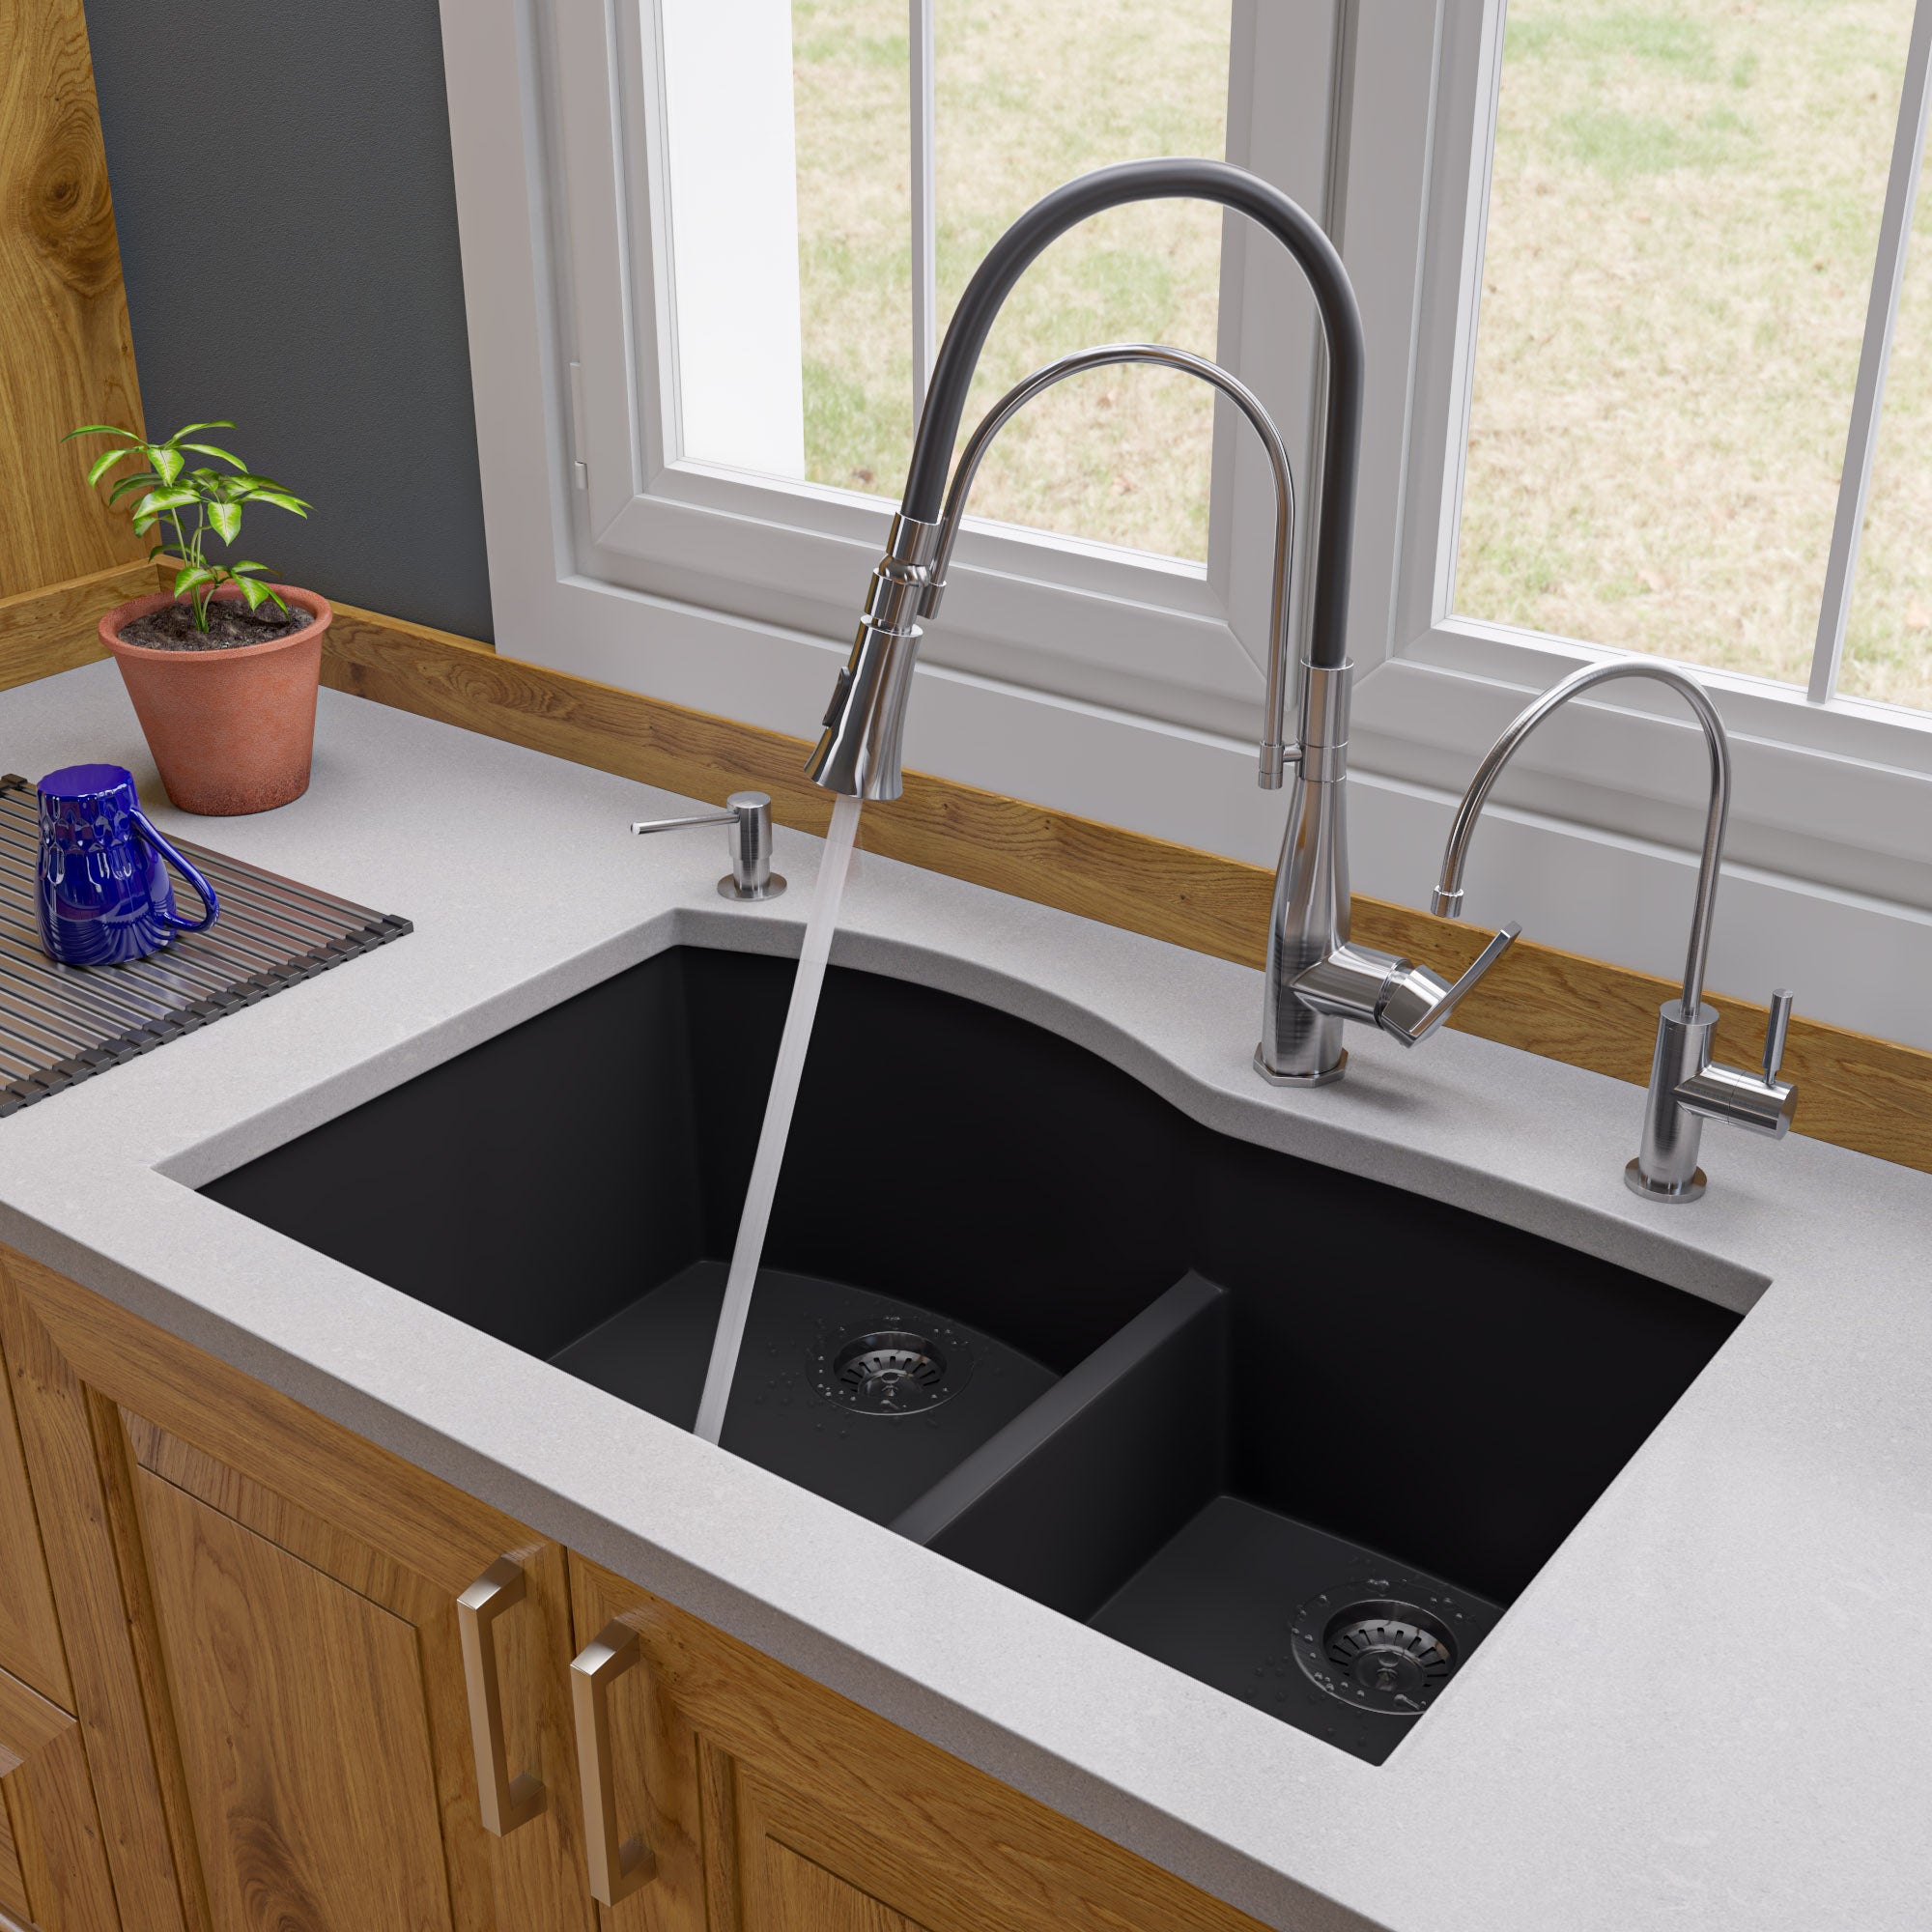 Country Sink Base Cabinet - Specialty Products - Diamond